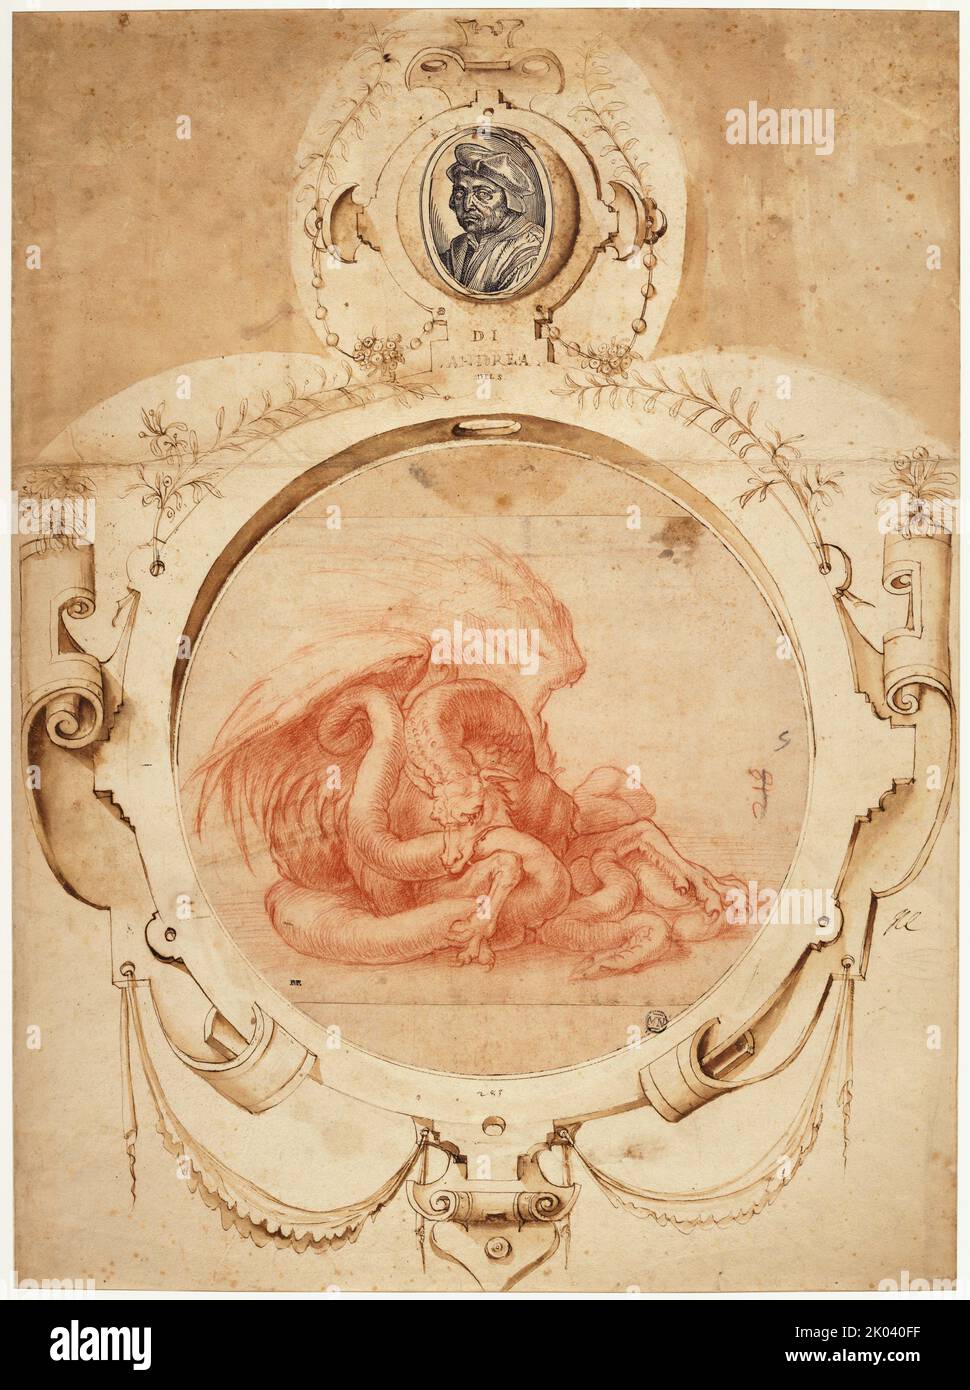 Dragon devouring a snake. With a Portrait of Andrea del Sarto, First quarter of 16th cen. Found in the collection of the Mus&#xe9;e du Louvre, Paris. Stock Photo